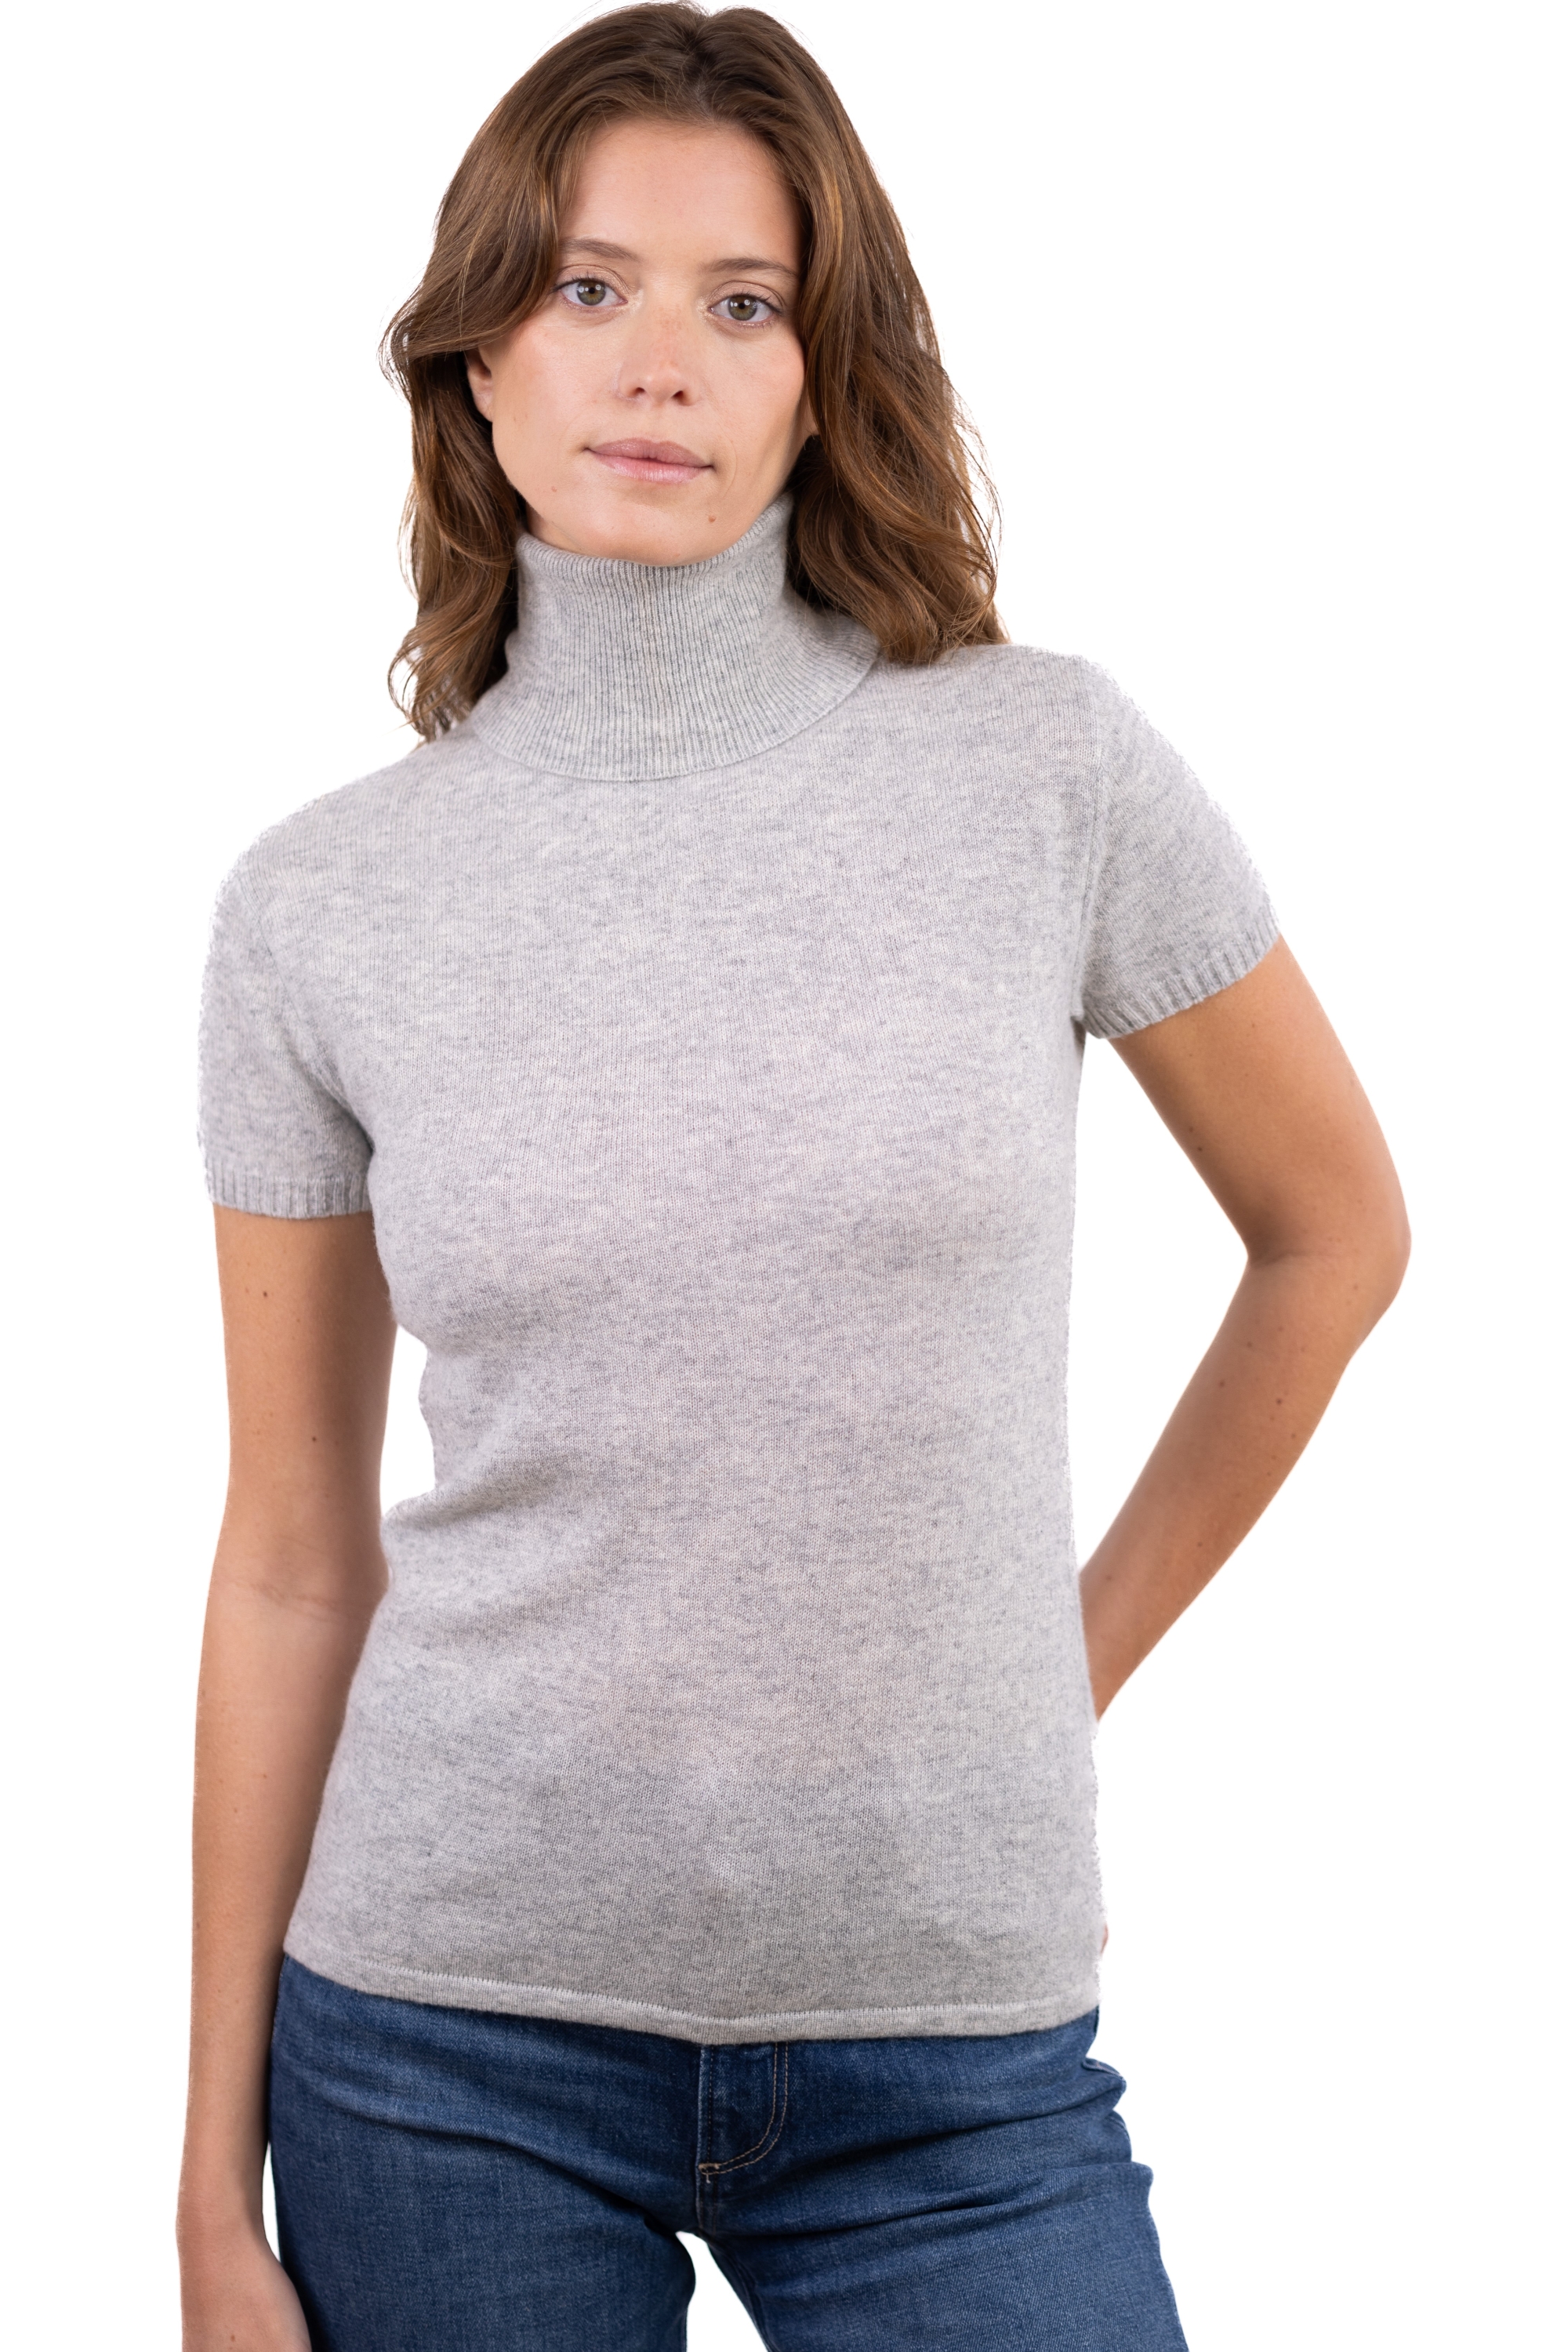 Cashmere ladies roll neck olivia flanelle chine 3xl